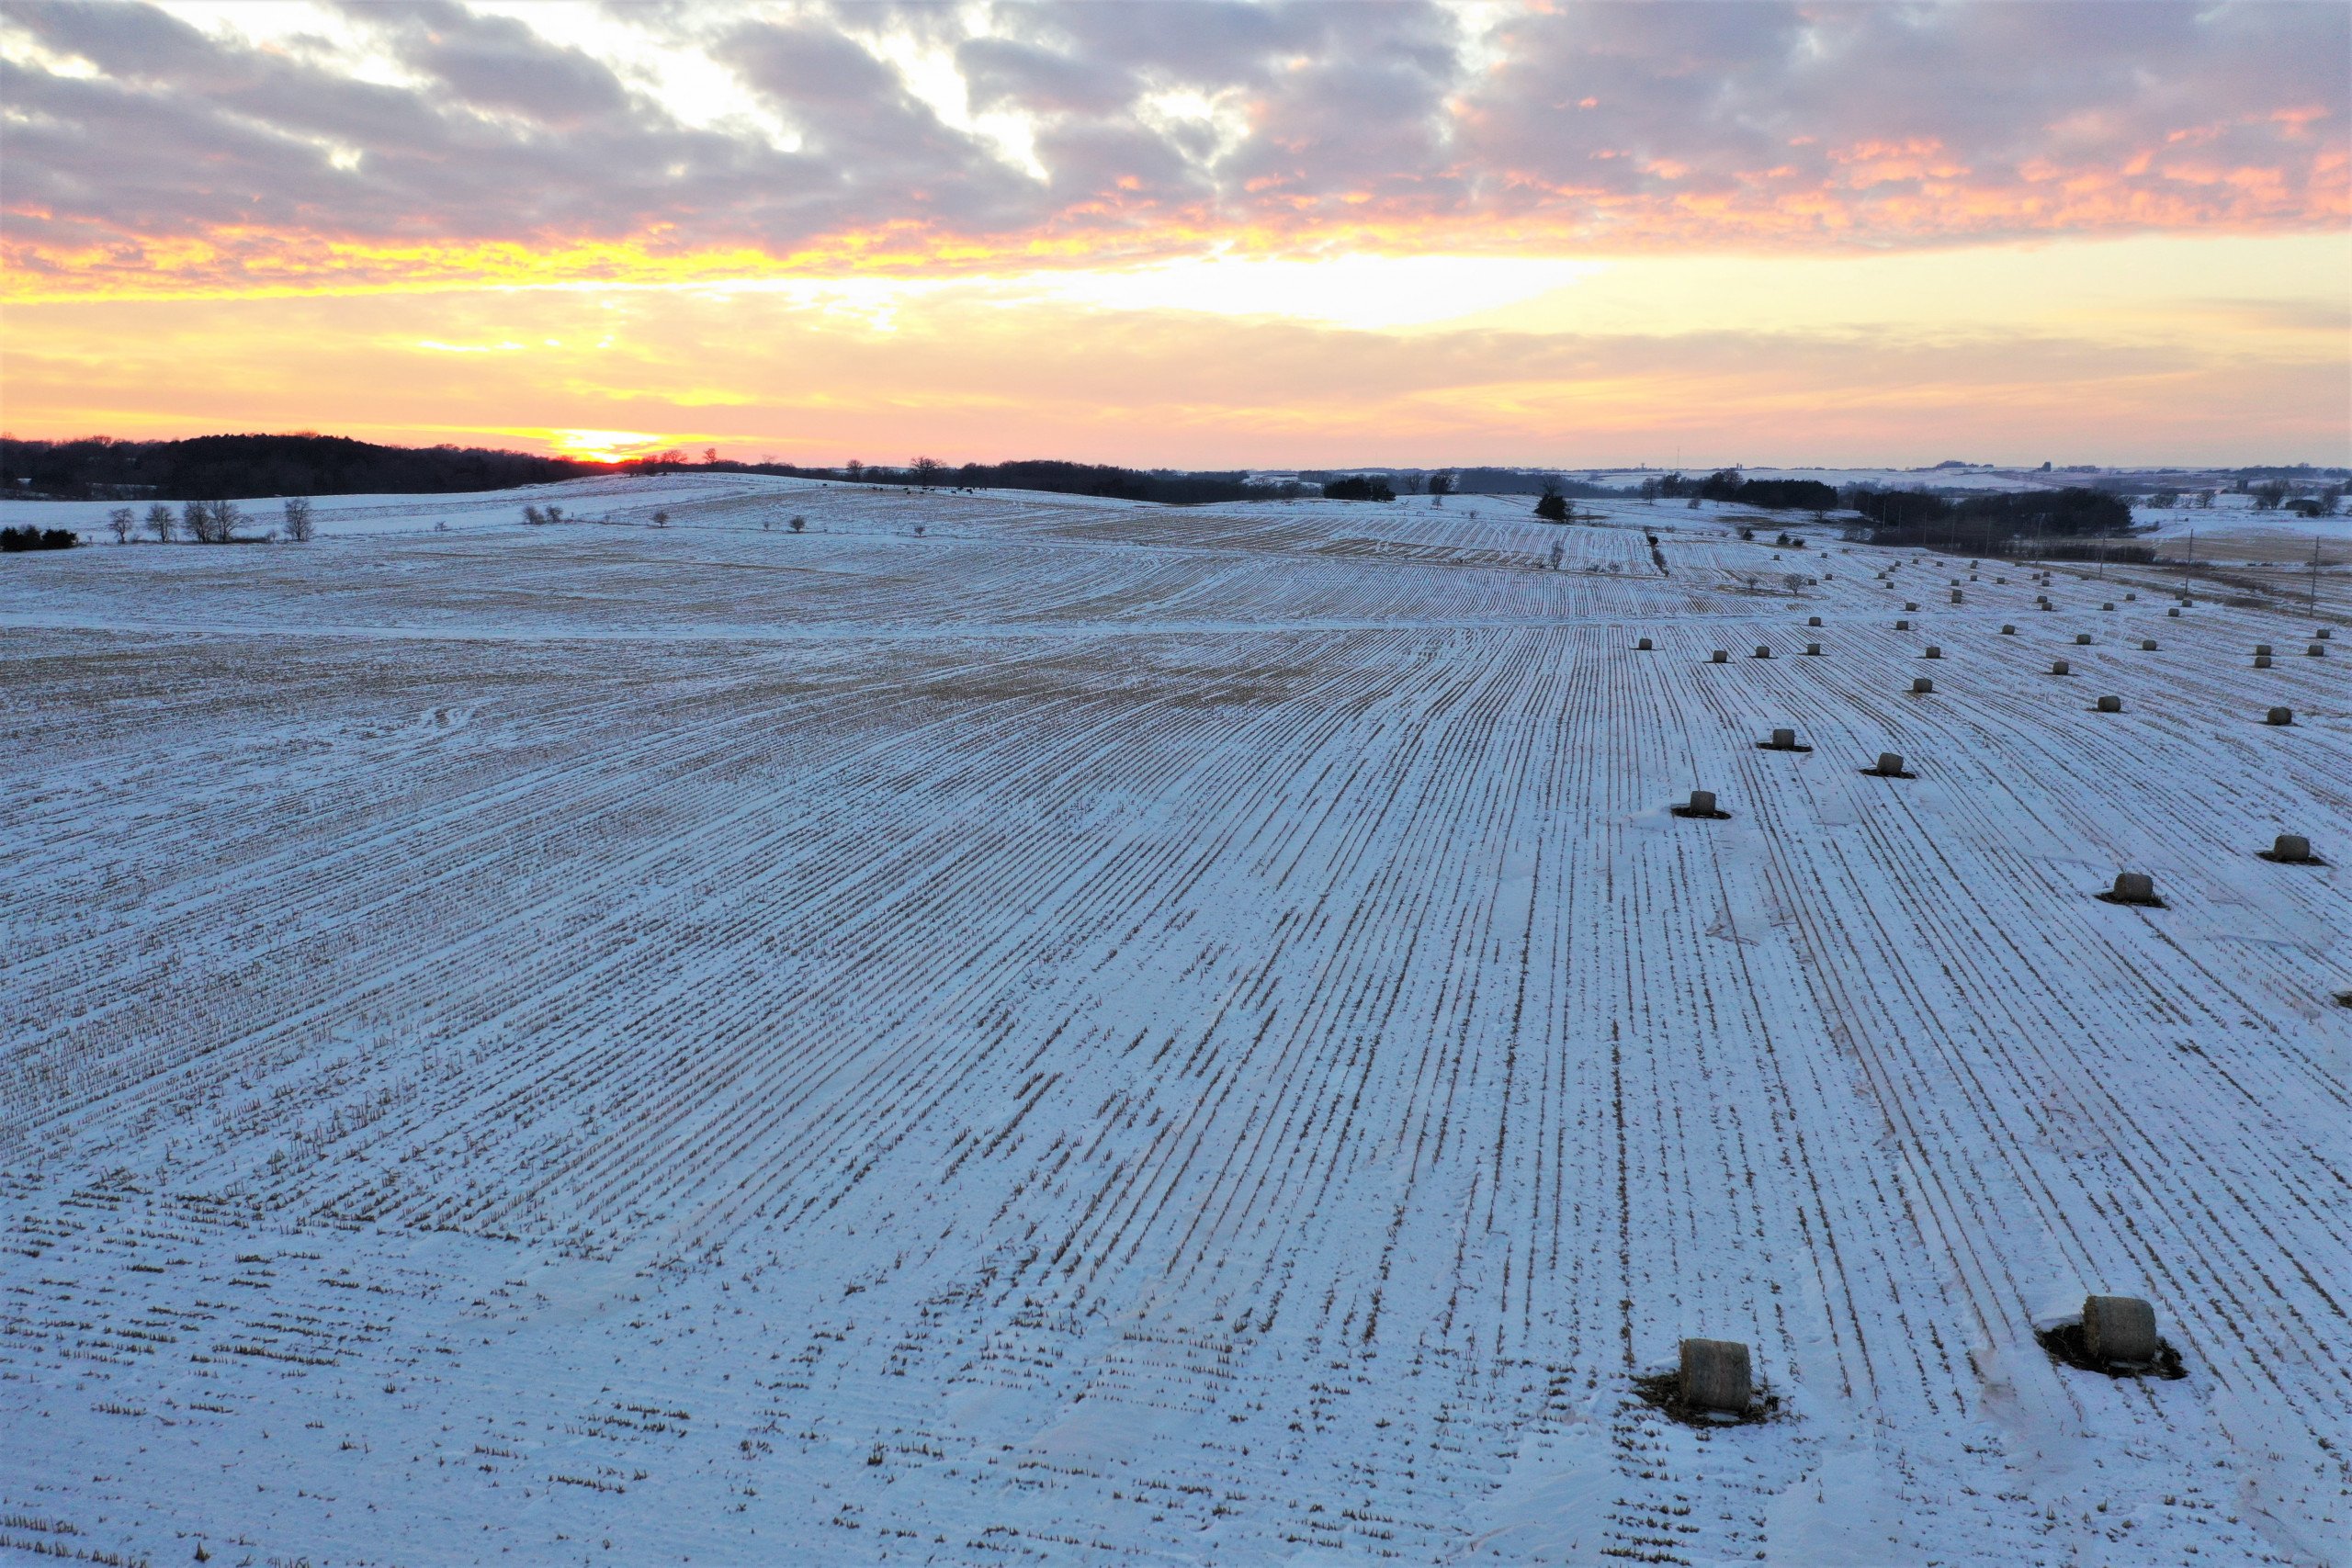 auctions-land-dubuque-county-iowa-71-acres-listing-number-16003-DJI_0590-3.jpg